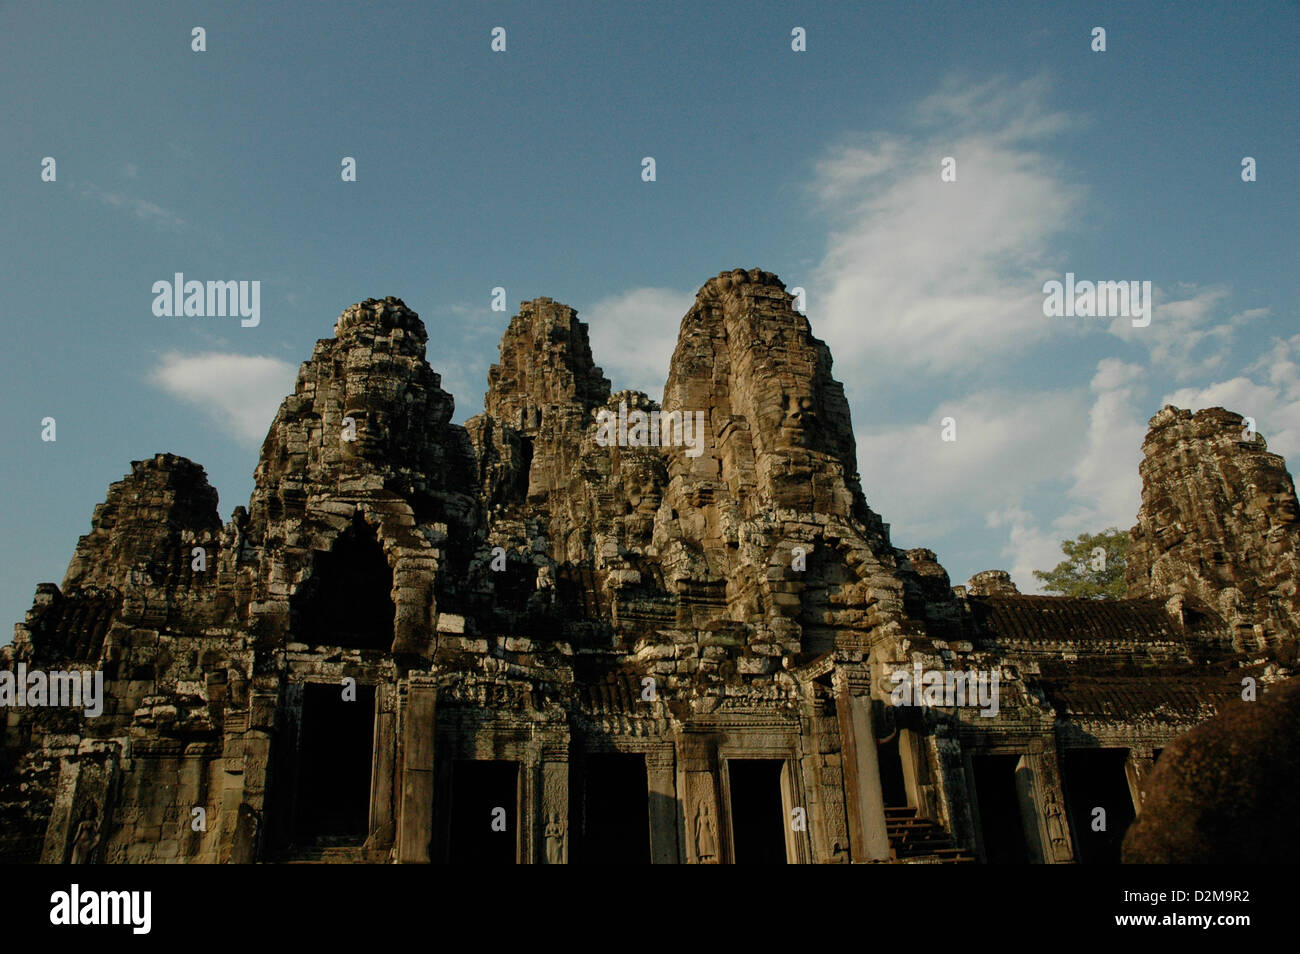 Wide shot of Bayon temple, Angkor Wat complex, Cambodia Stock Photo